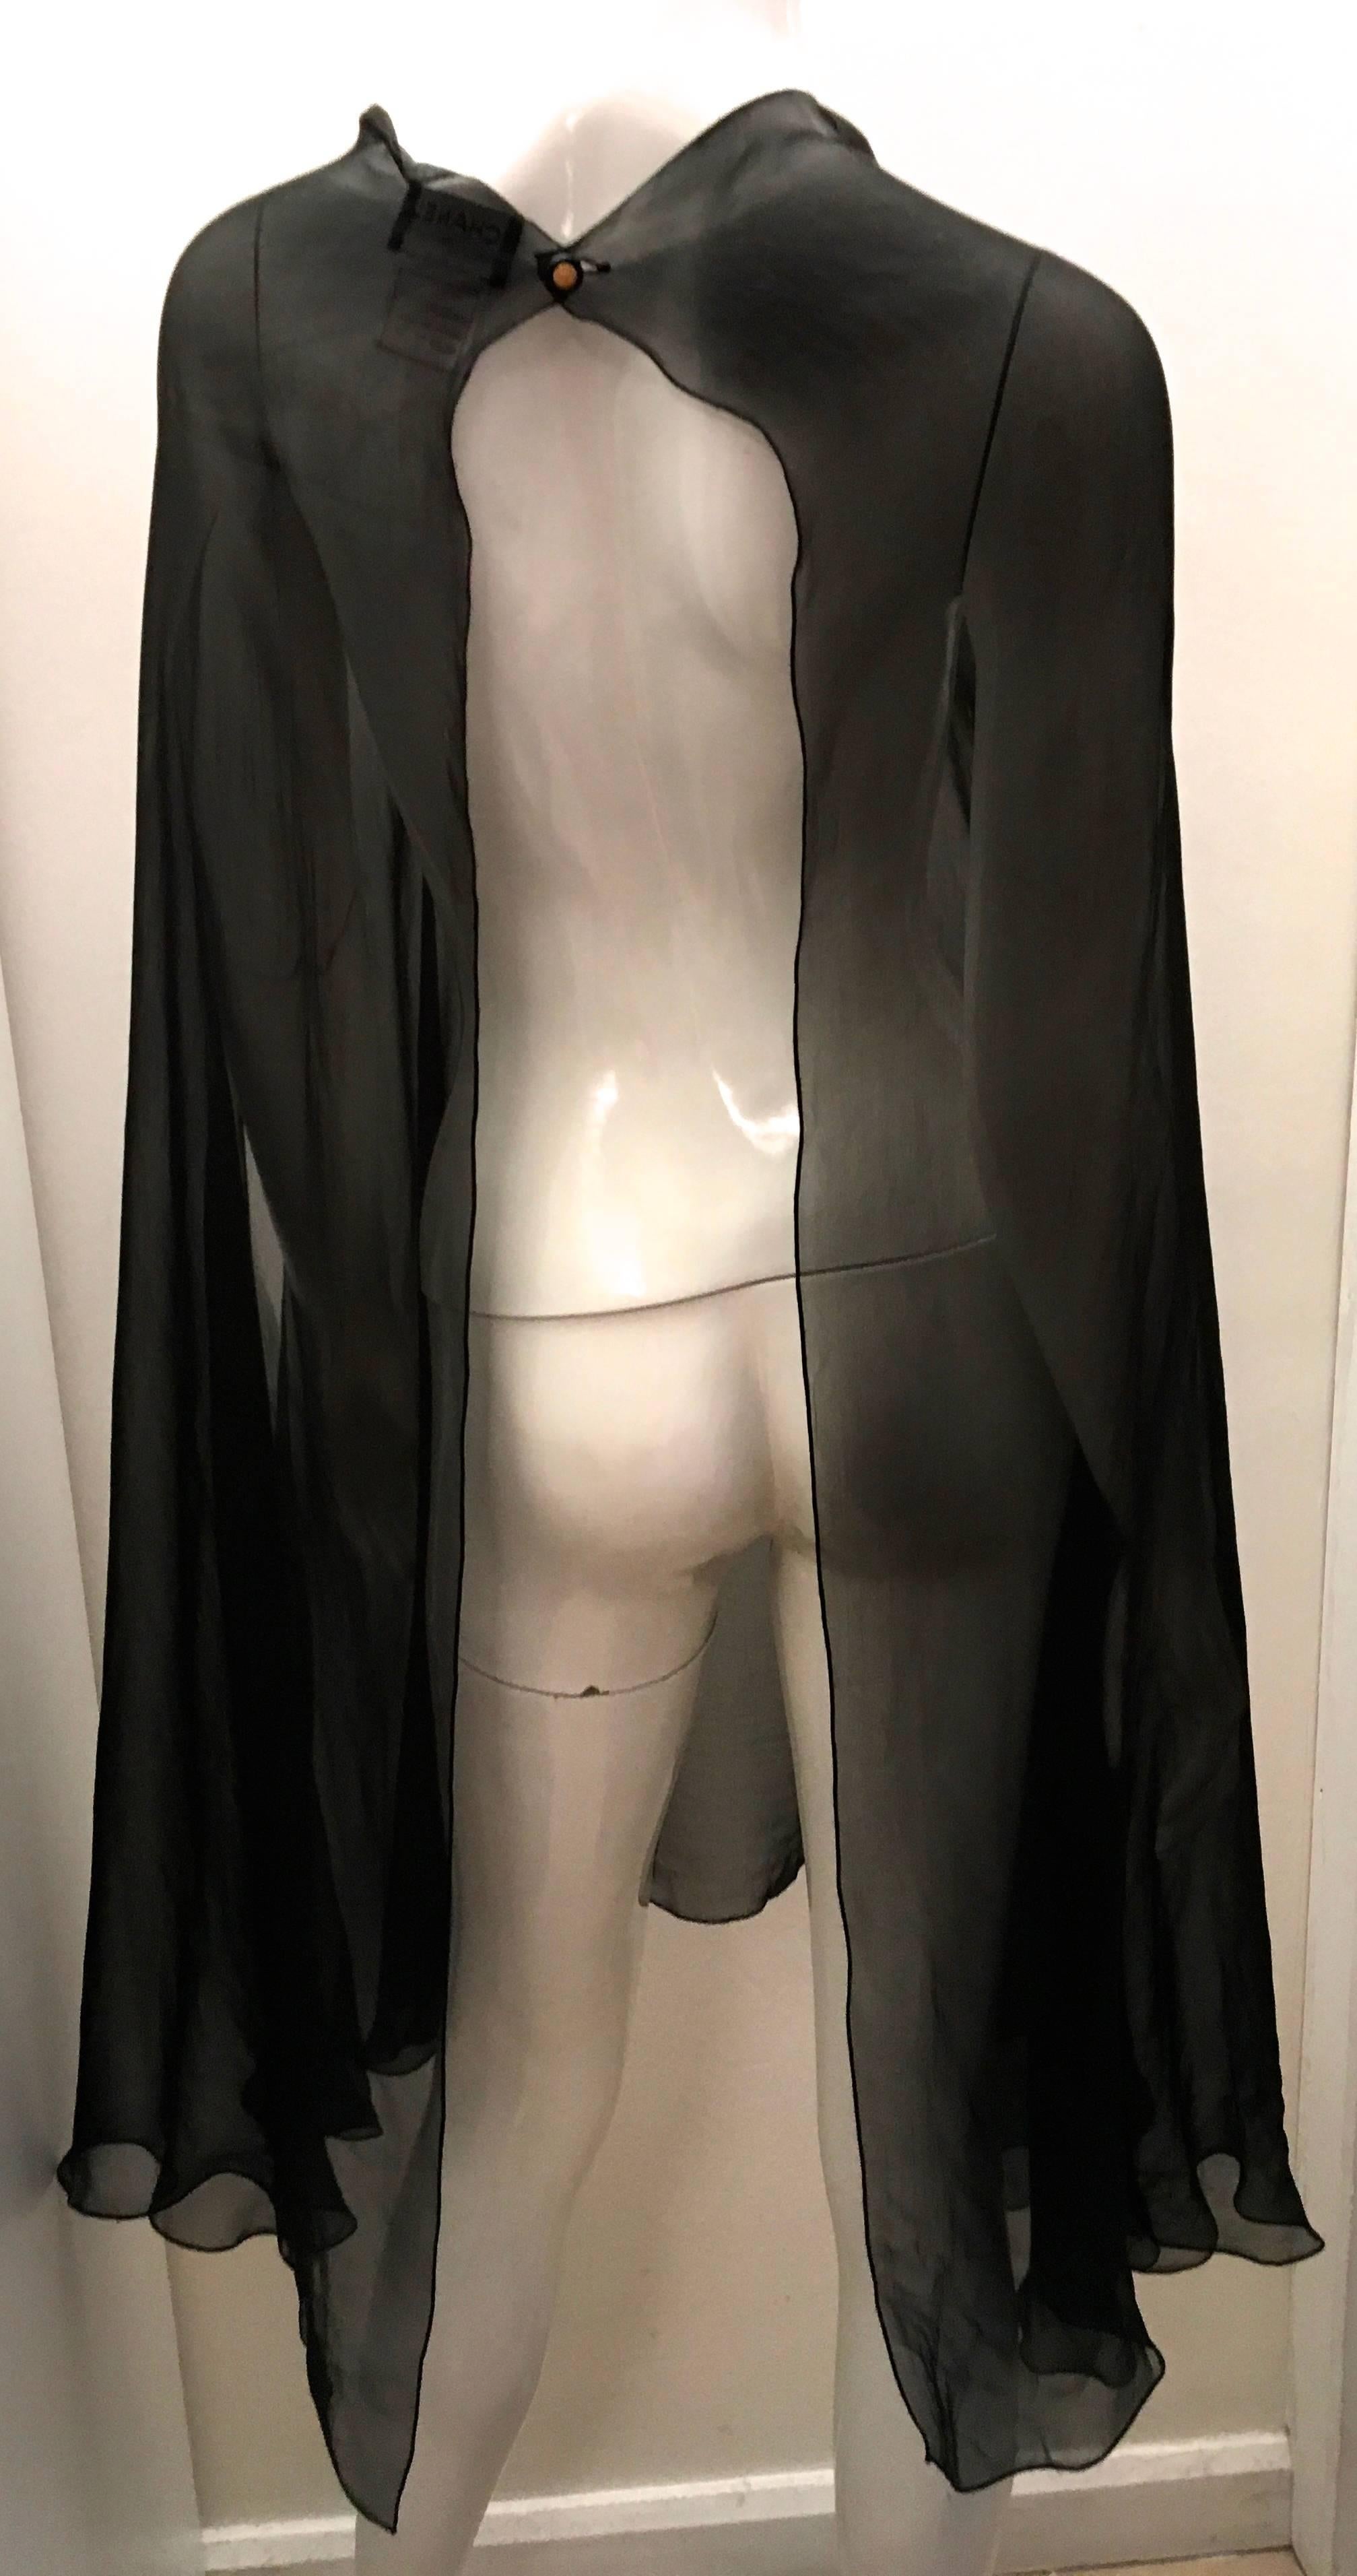 Fabulous Chanel Sheer Cape  In Excellent Condition For Sale In Boca Raton, FL